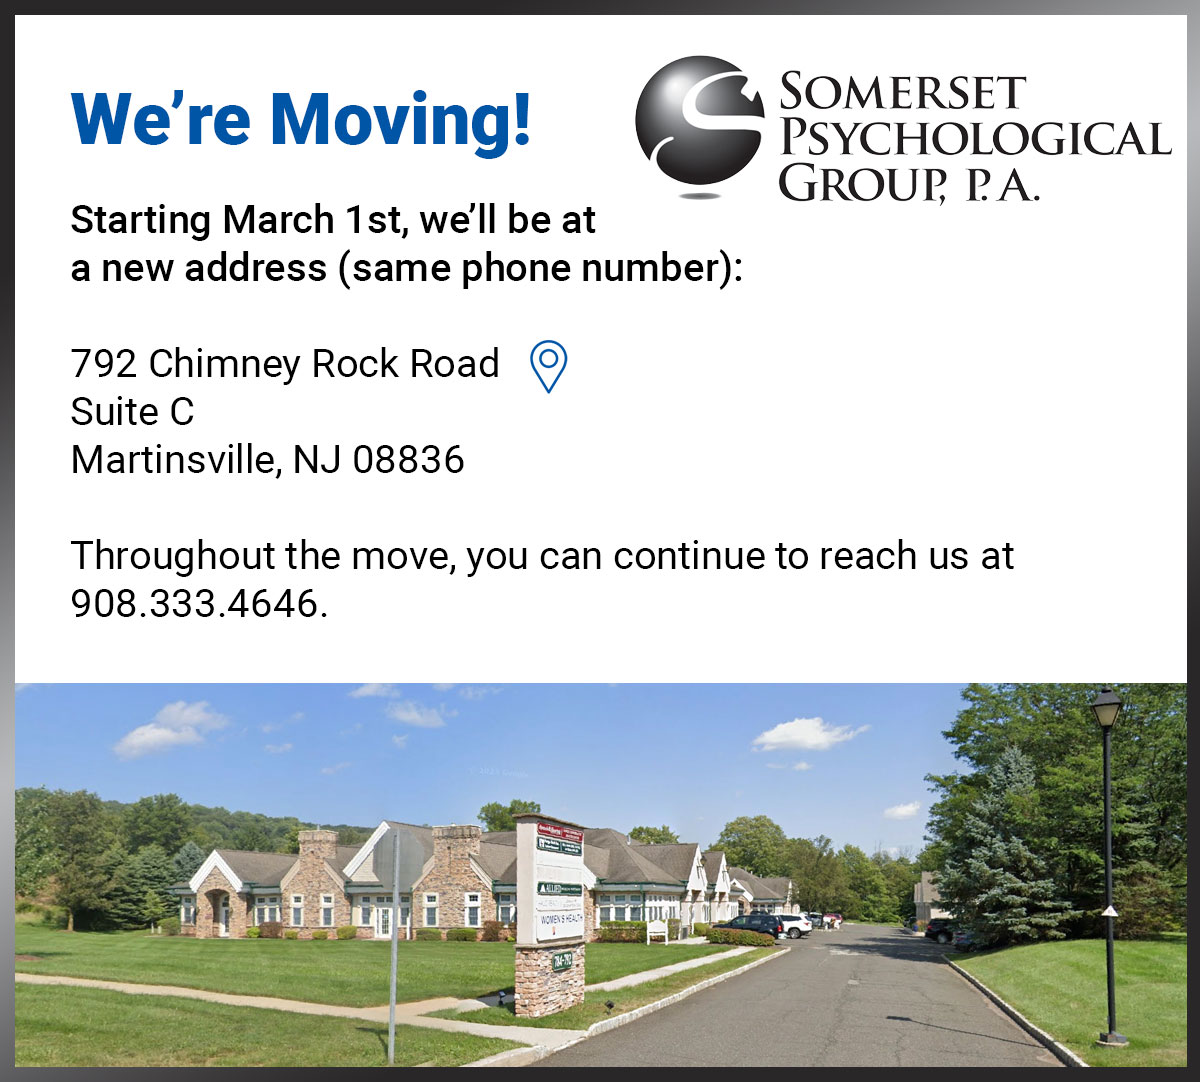 We're moving to 792 Chimney Rock Road, Suite C, Martinsville, NJ 08836 as of March 1st.